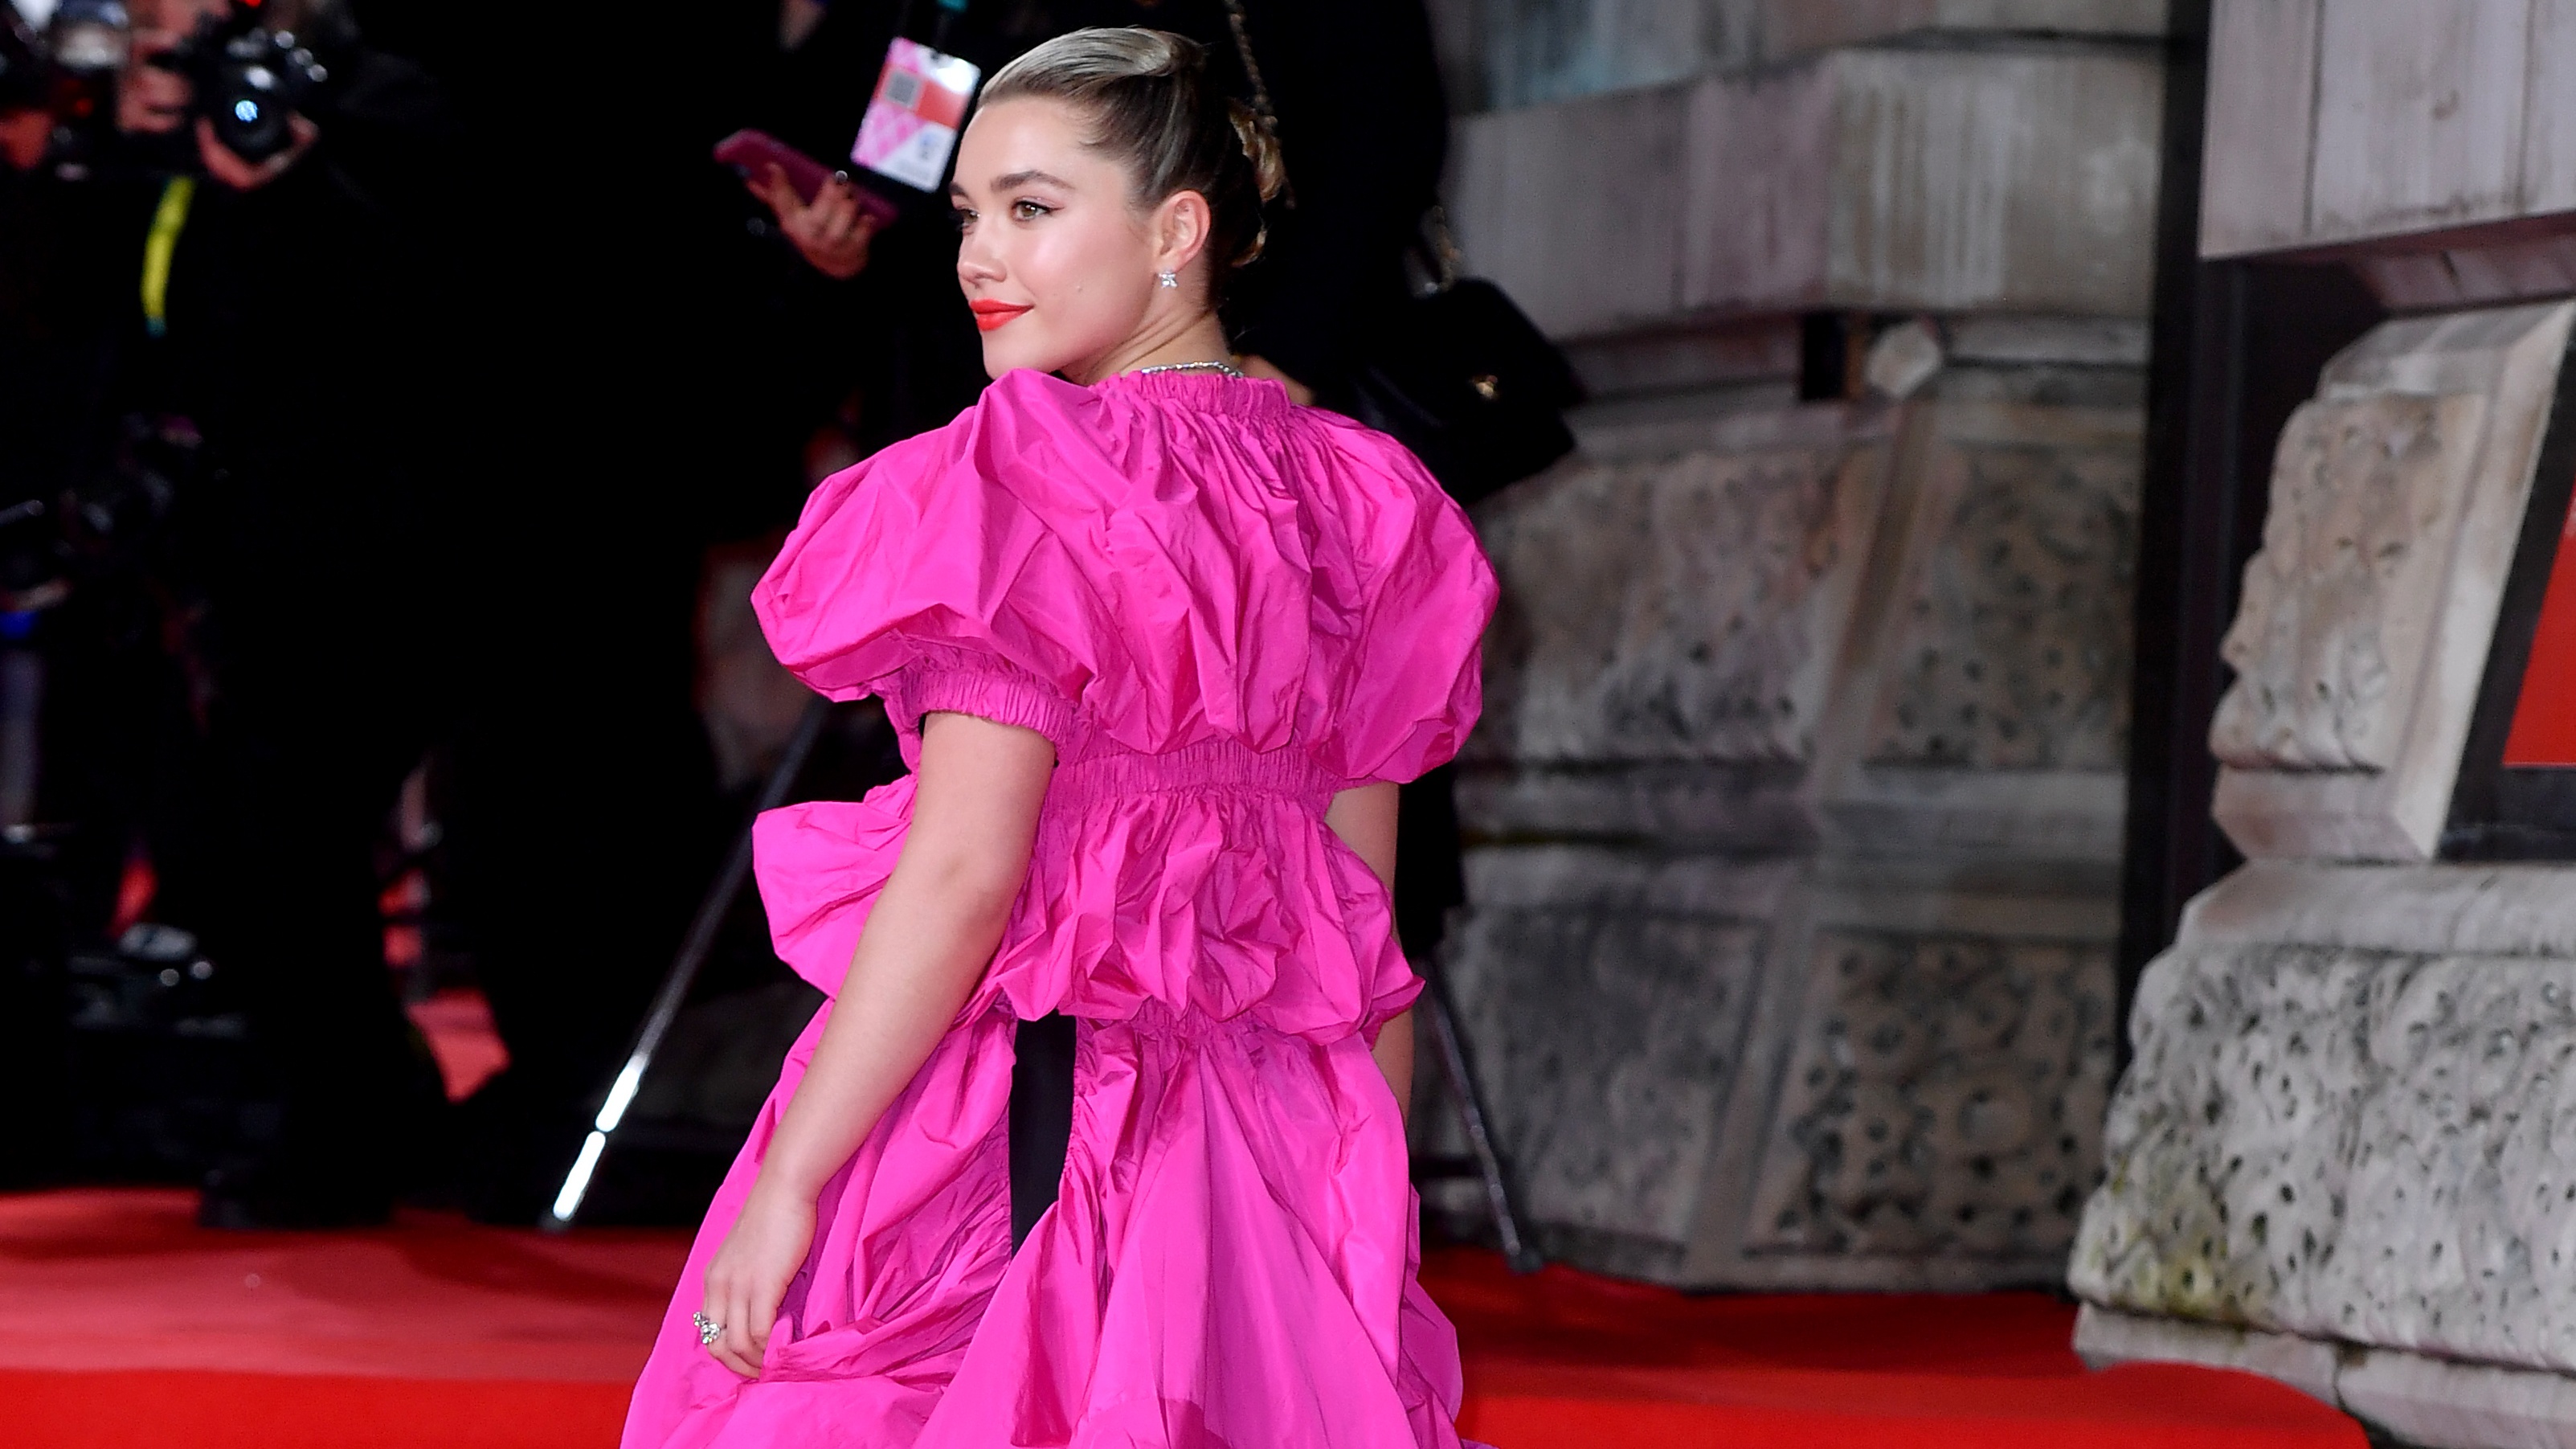 Baftas 2020 Florence Pugh Arrives In Stunning Hot Pink Gown